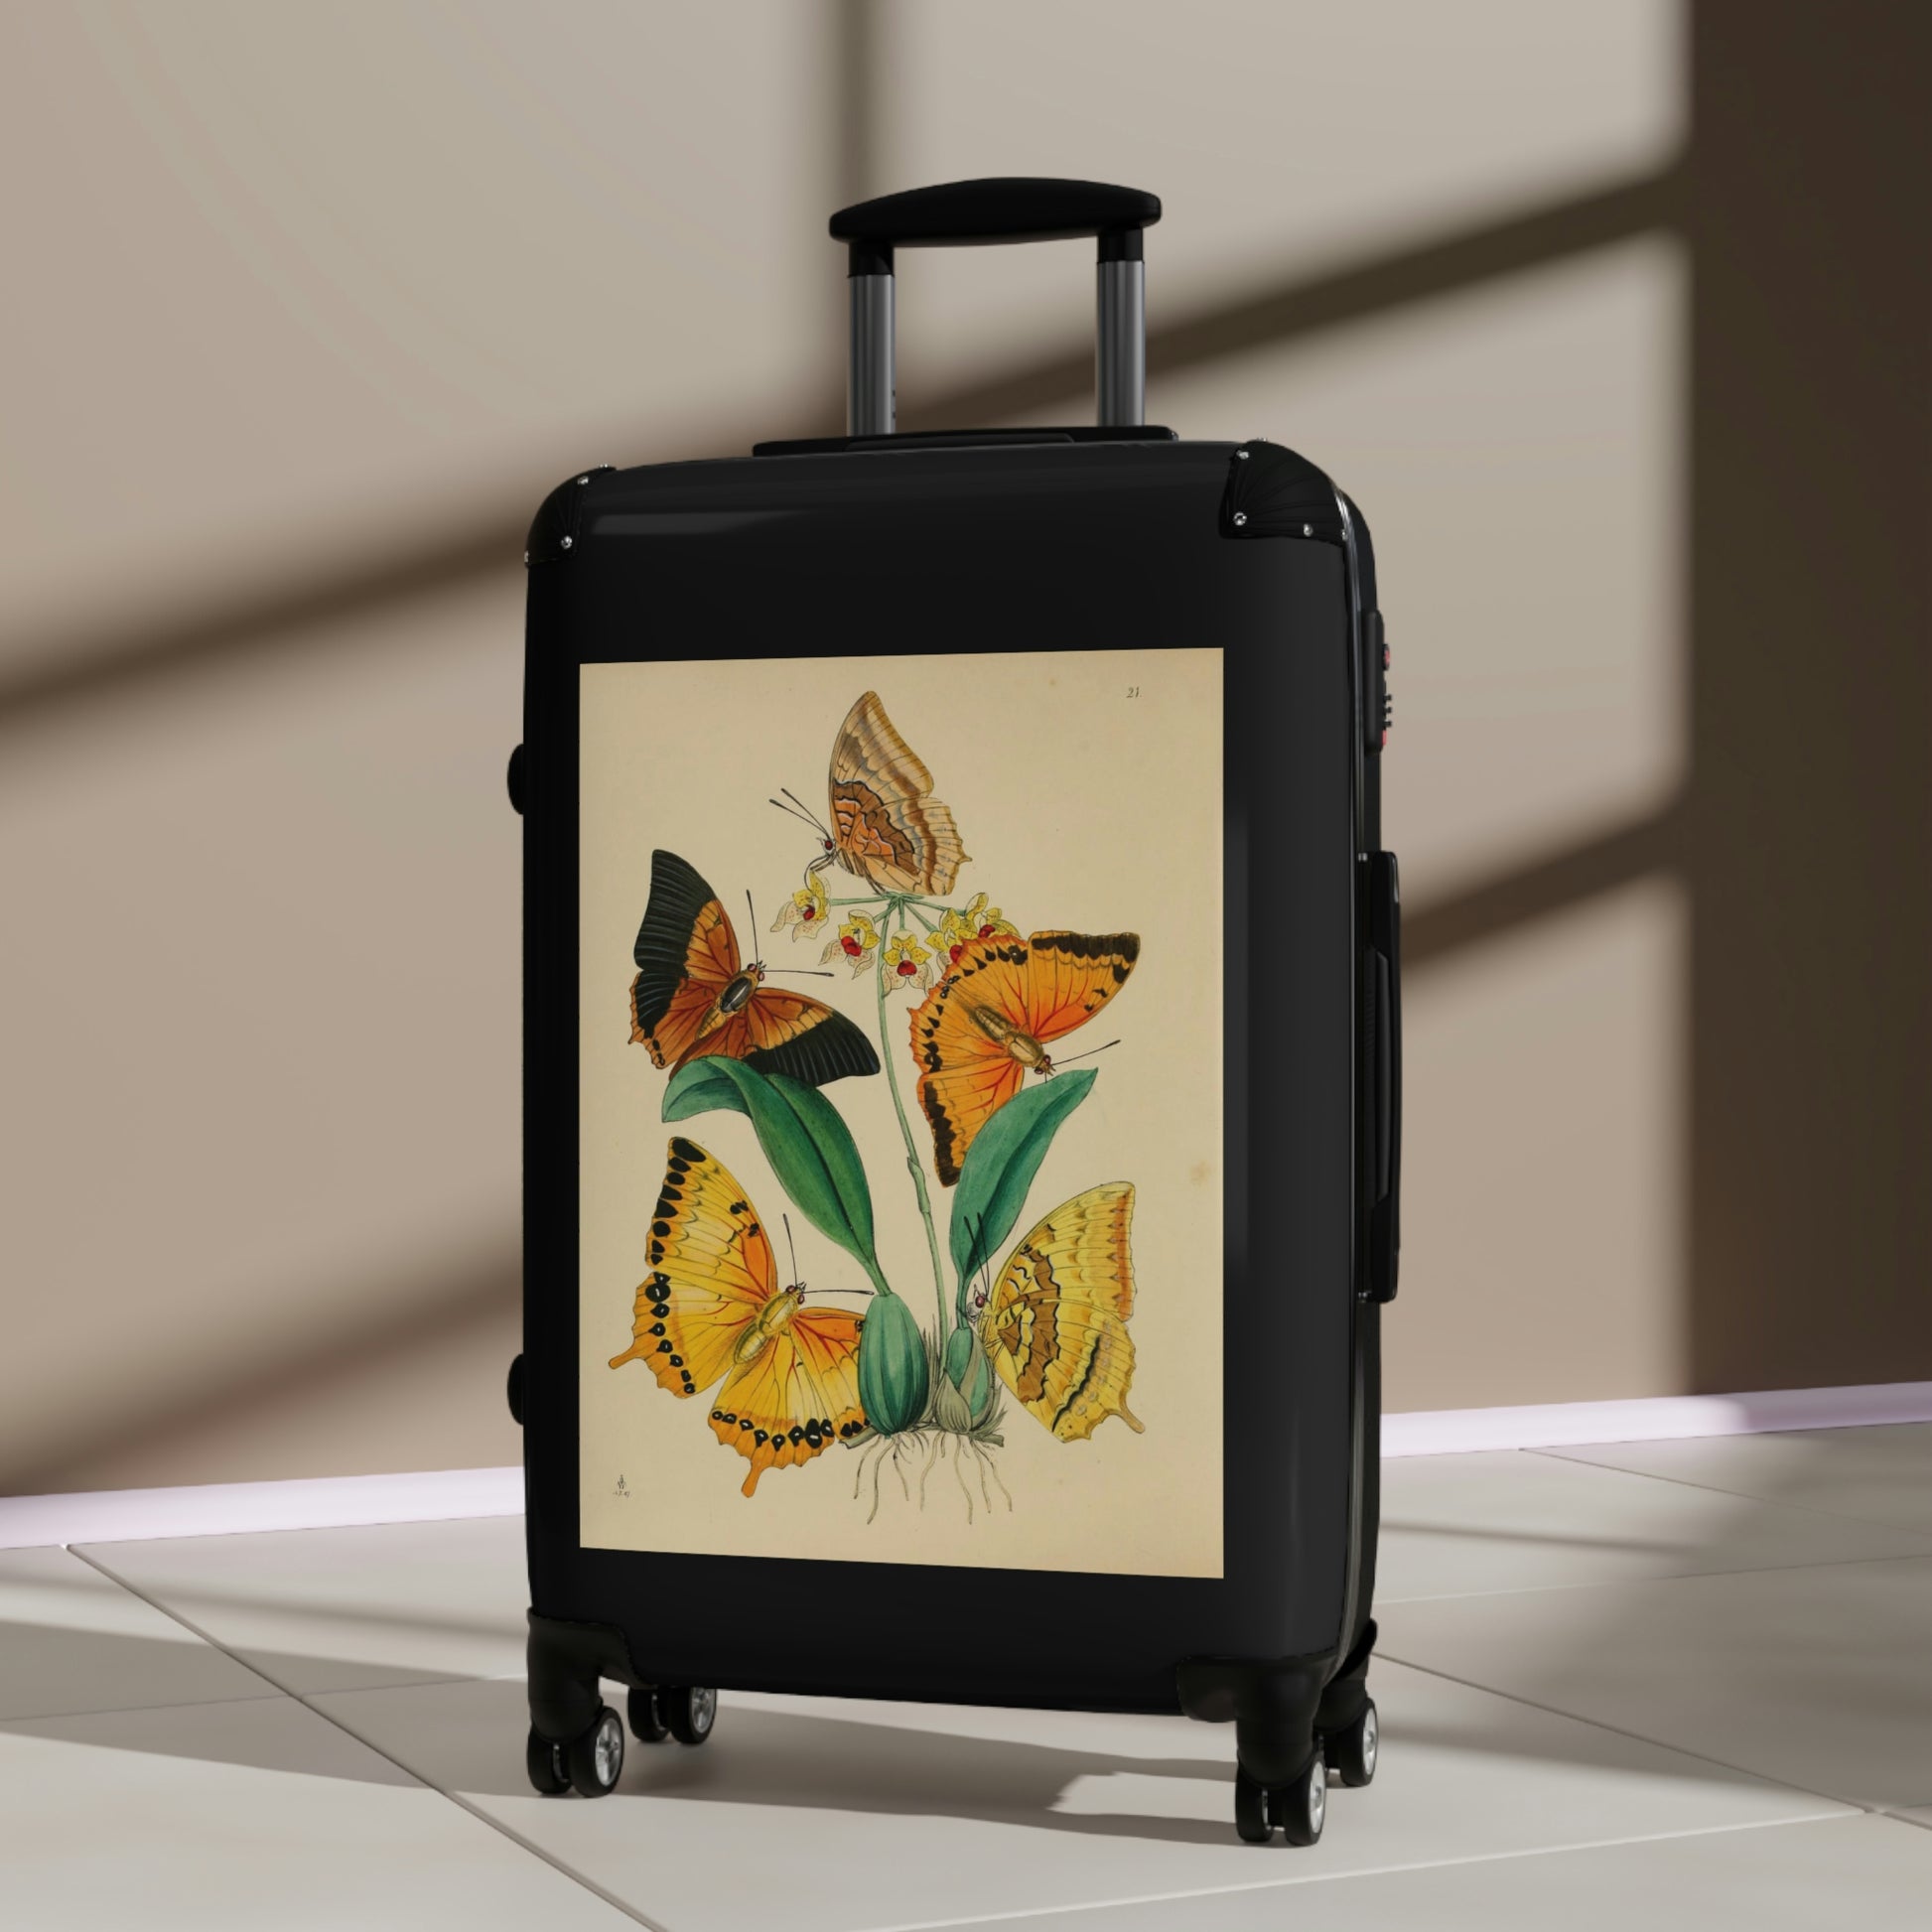 Getrott Butterflies Macrolepidopteran Rhopalocera Yellow Lepidoptera Cabin Suitcase Rolling Luggage Extended Storage Adjustable Telescopic Handle Double wheeled Polycarbonate Hard-shell Built-in Lock-Bags-Geotrott